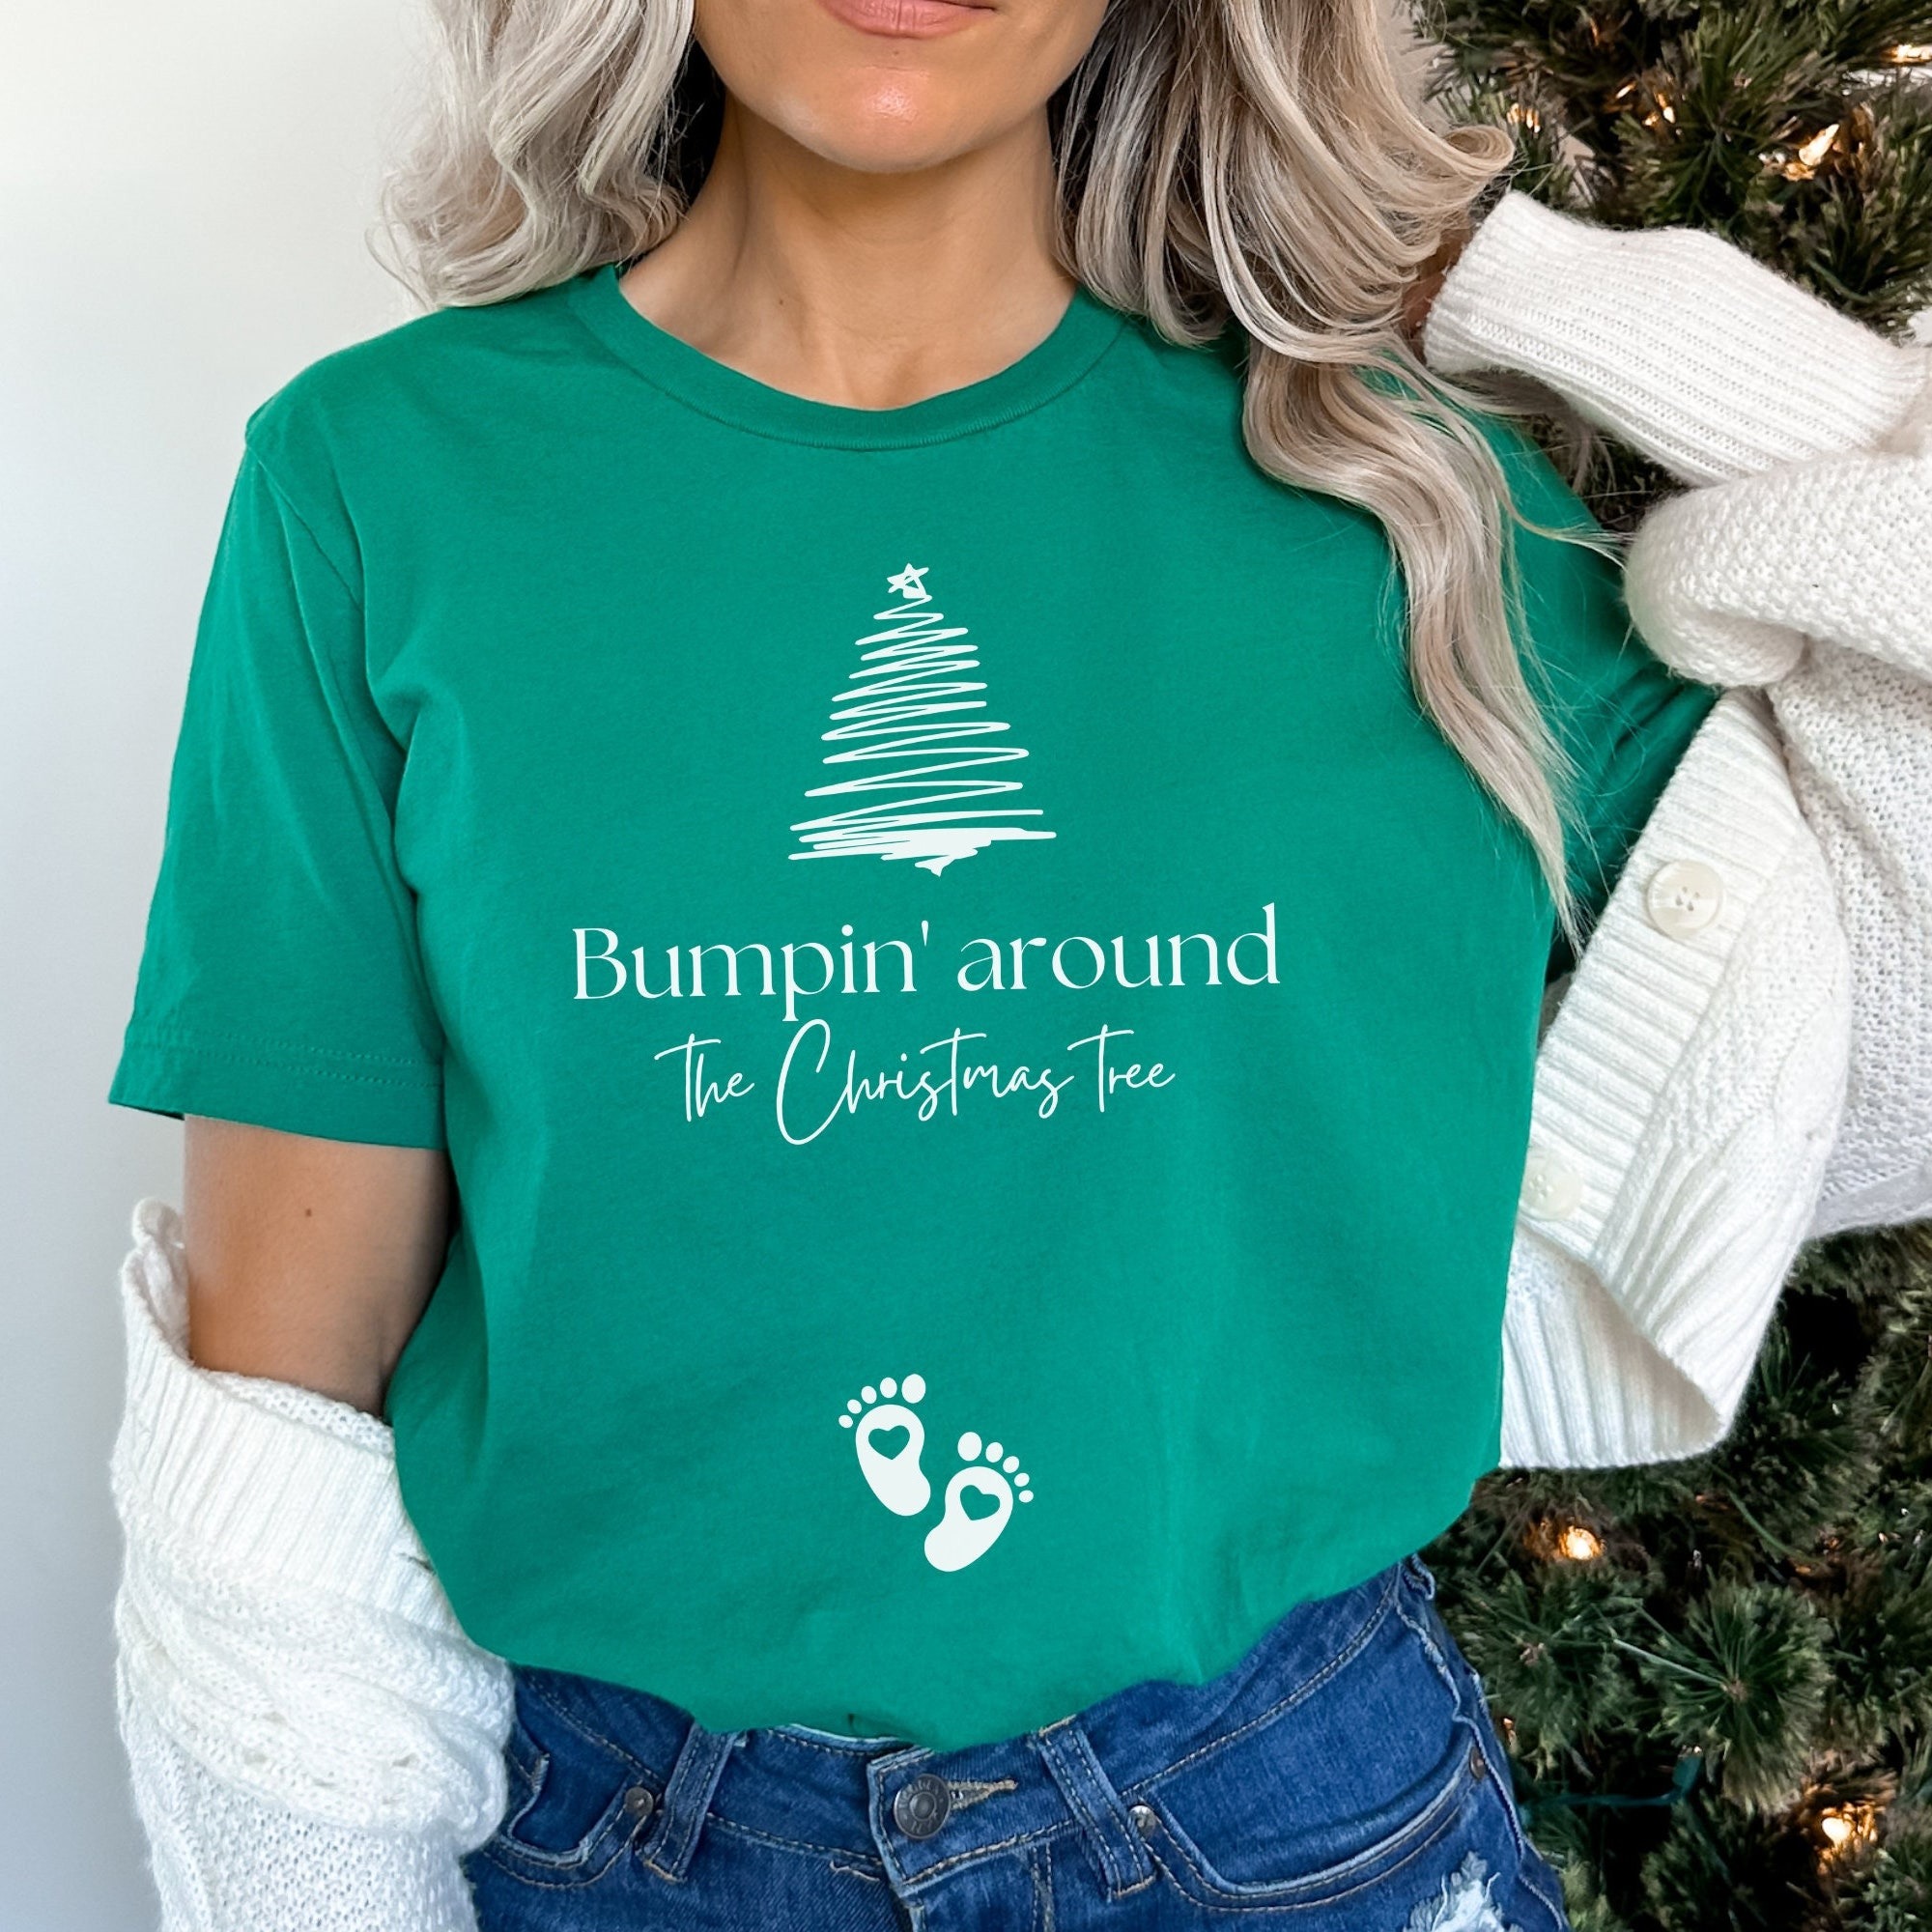 Christmas Pregnancy Announcement shirt, Bumpin around the Christmas tree maternity t-shirt, Funny Baby reveal tshirt to family